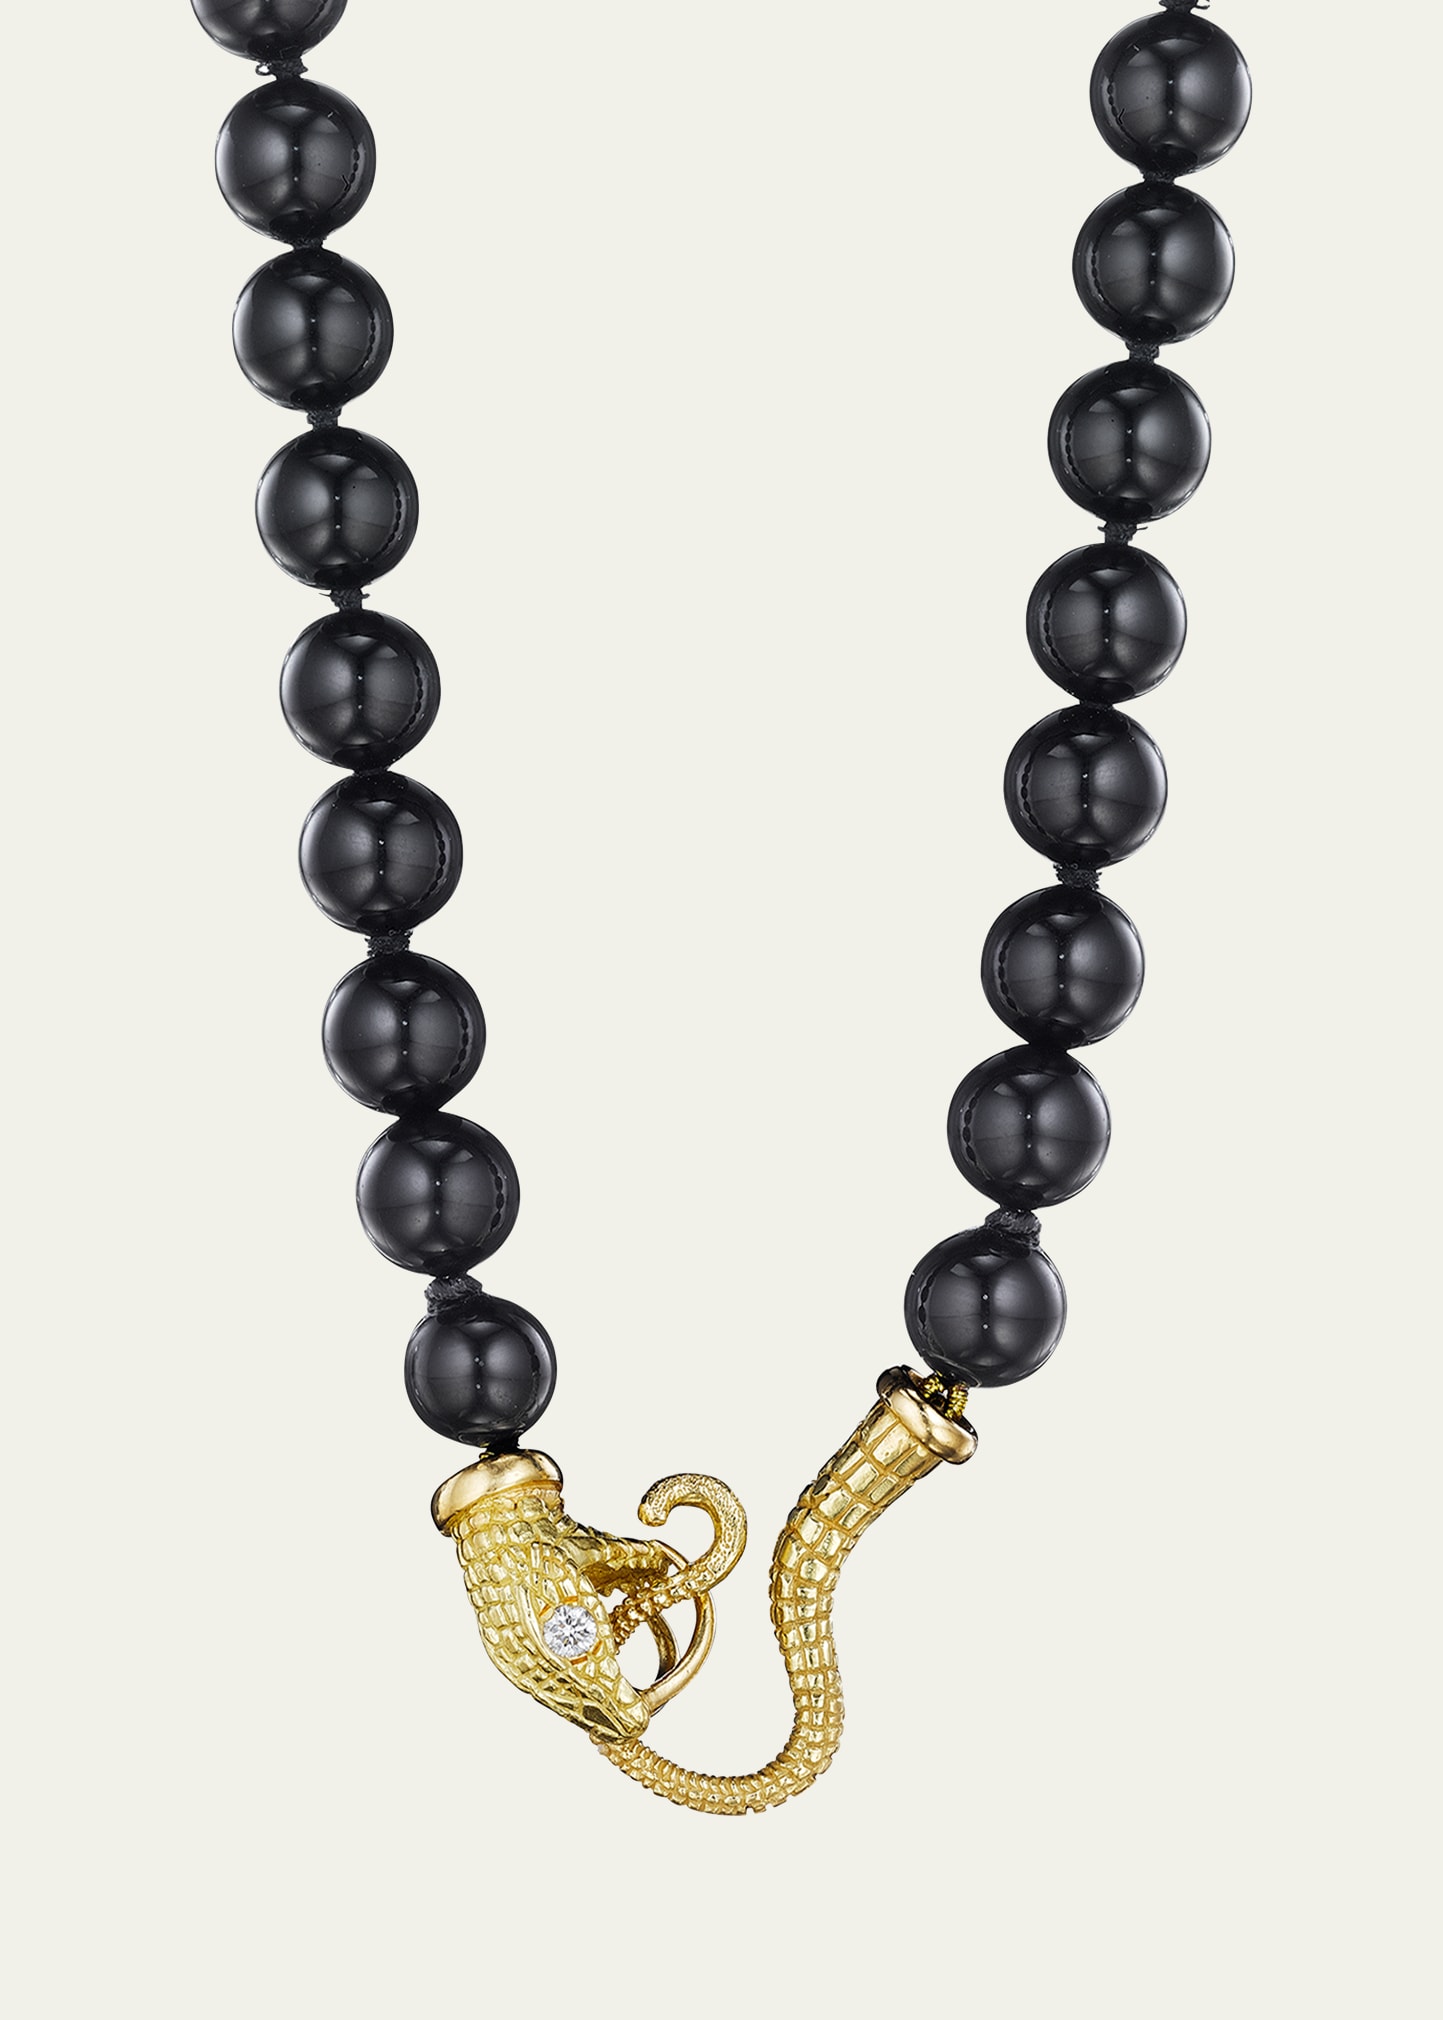 Black Onyx Bead Serpent Necklace in 18K Gold and Diamonds